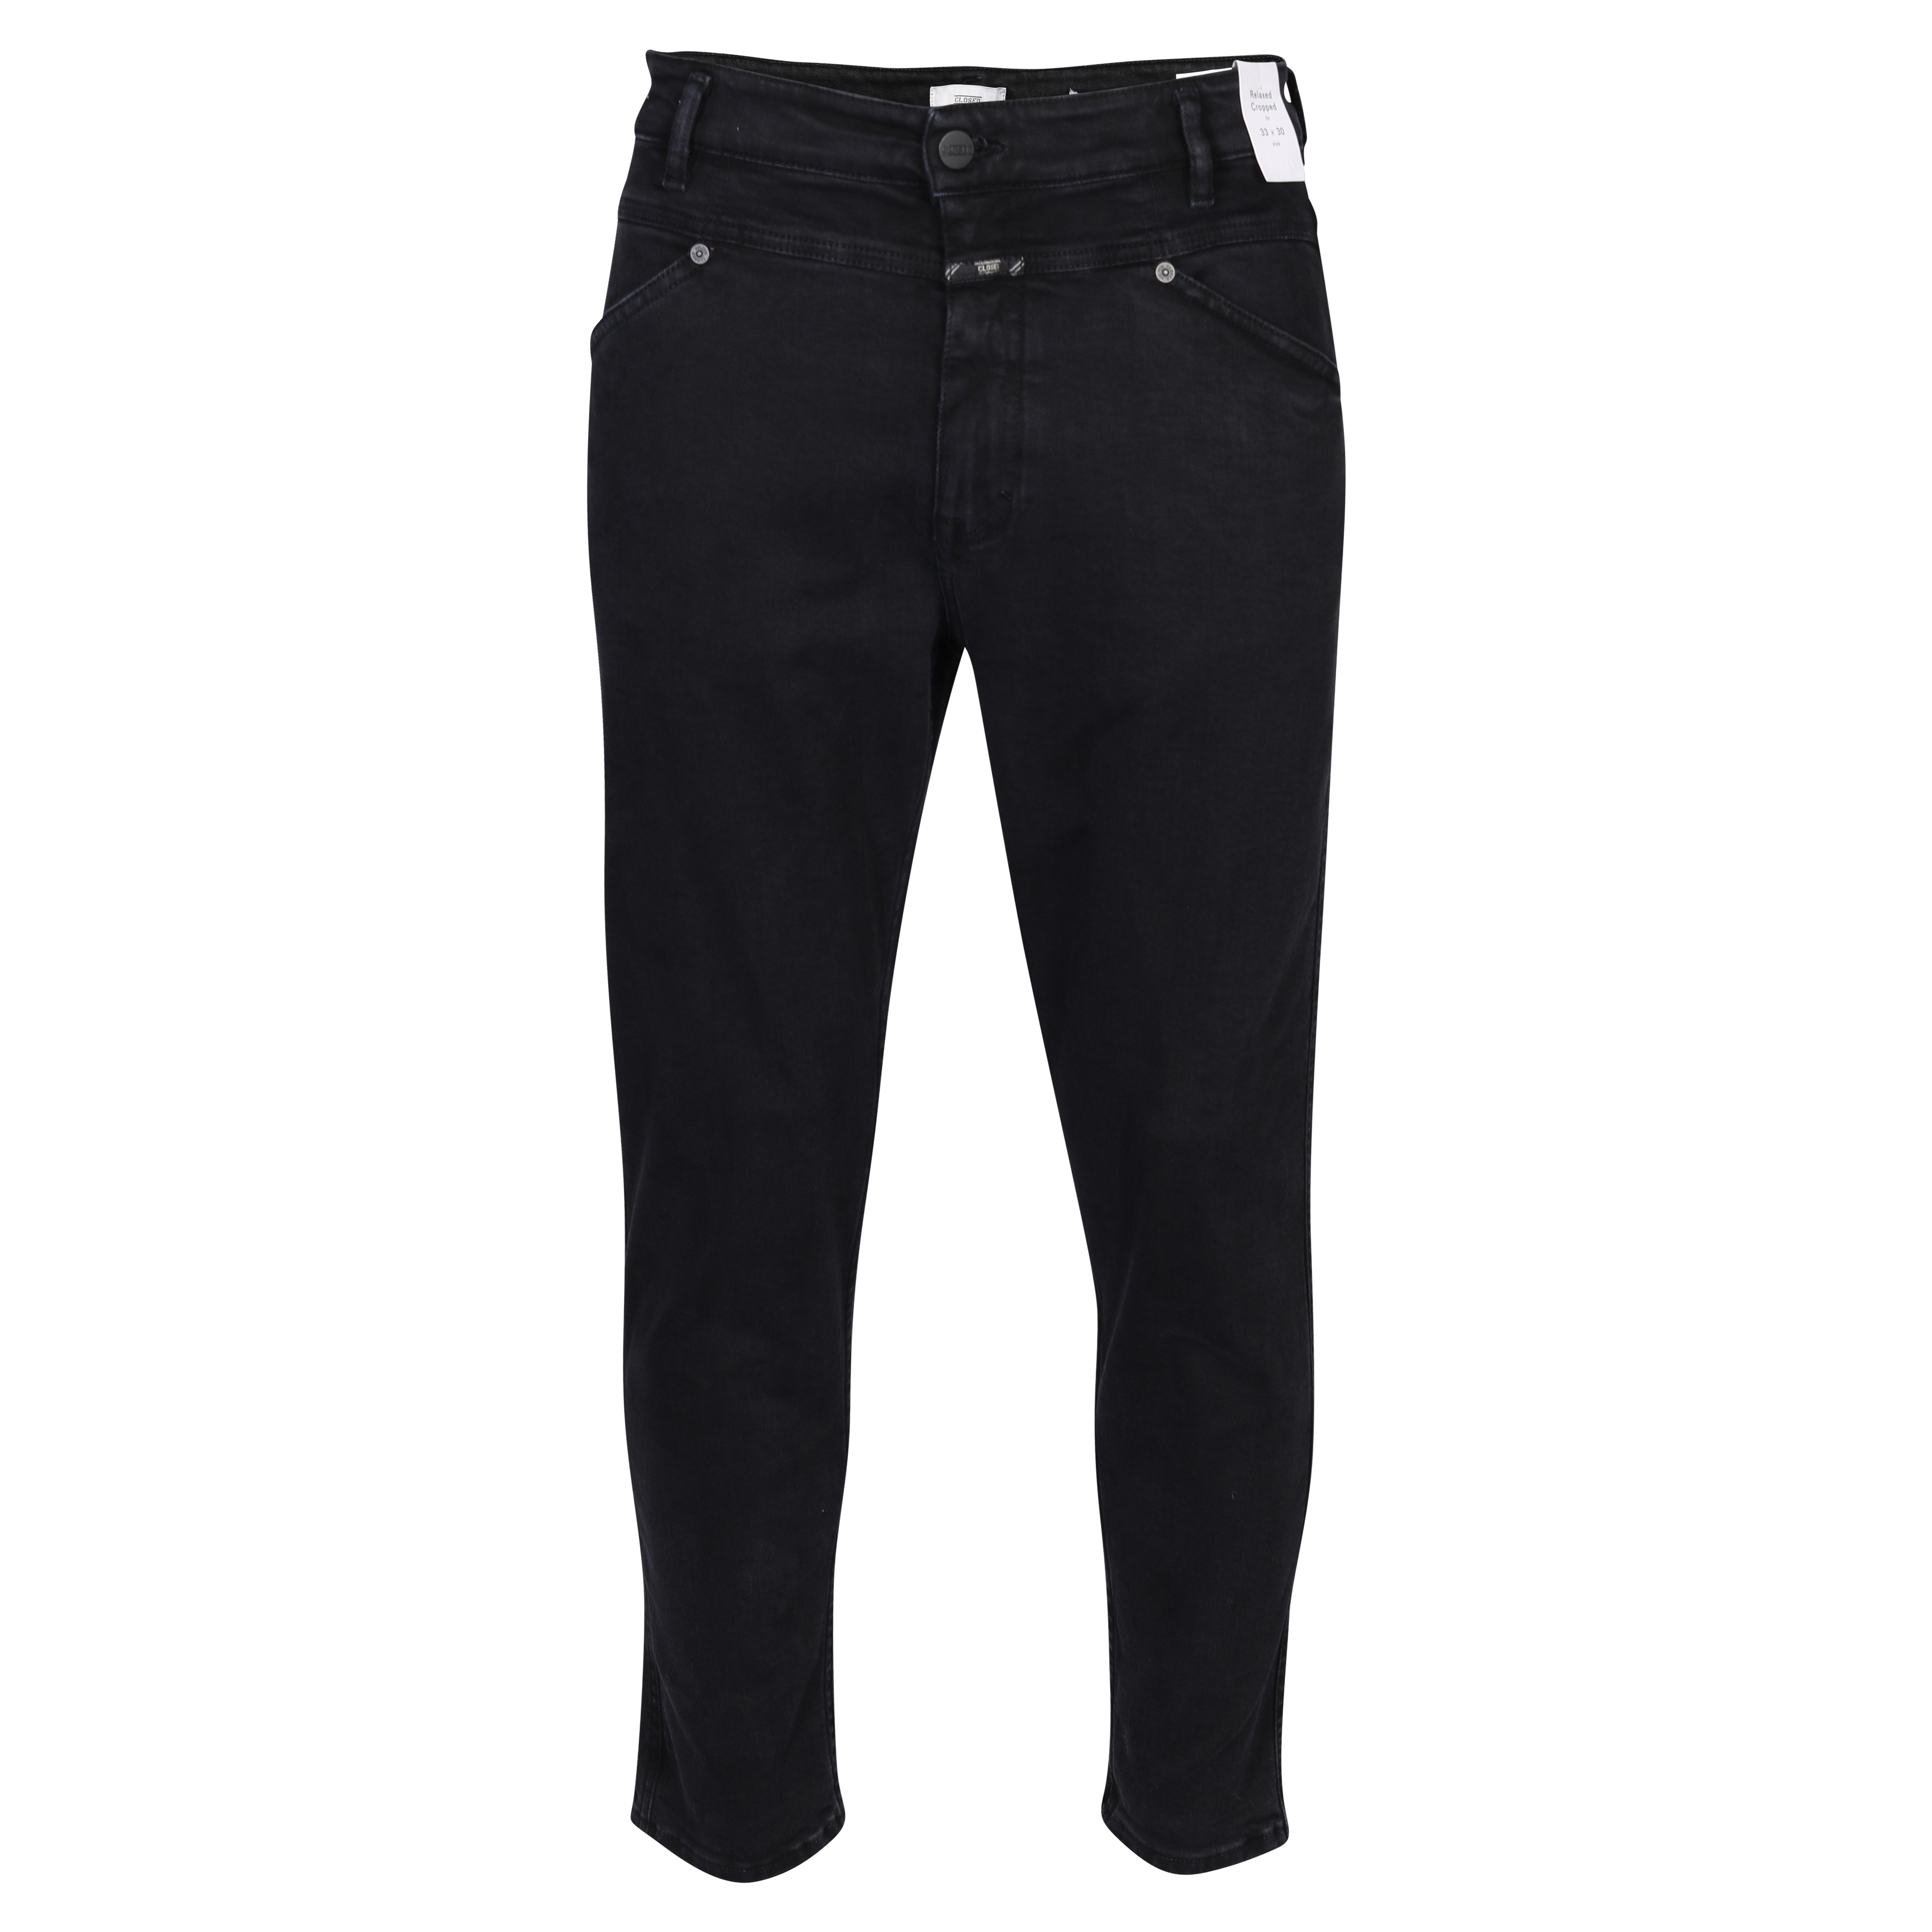 CLOSED X-Lent Tapered Jeans in Black 32